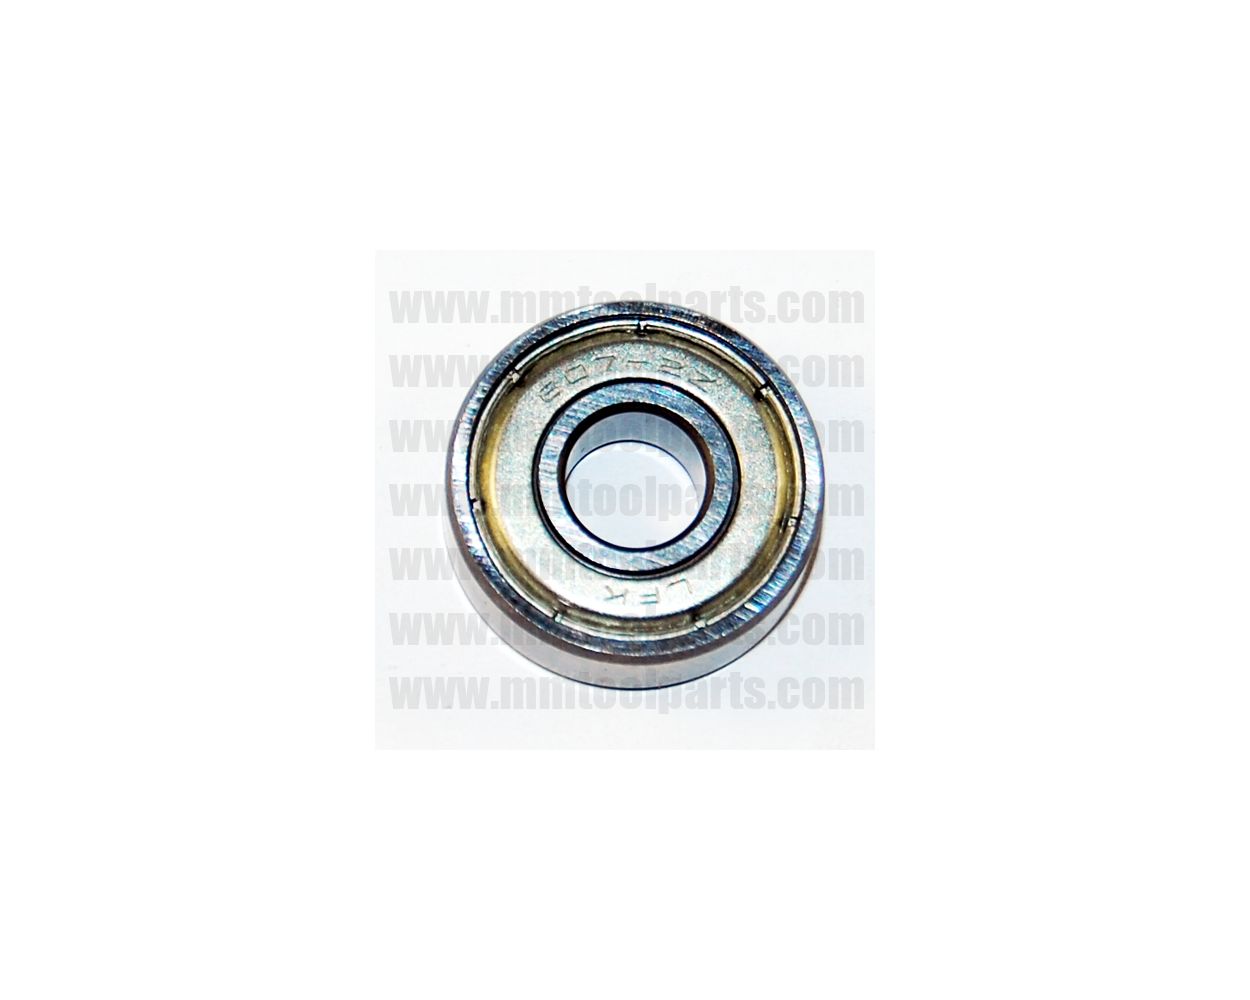 902 & 912 Series 10-32 Bearing Set for Complete Head Assembly Details about   SSG 802 